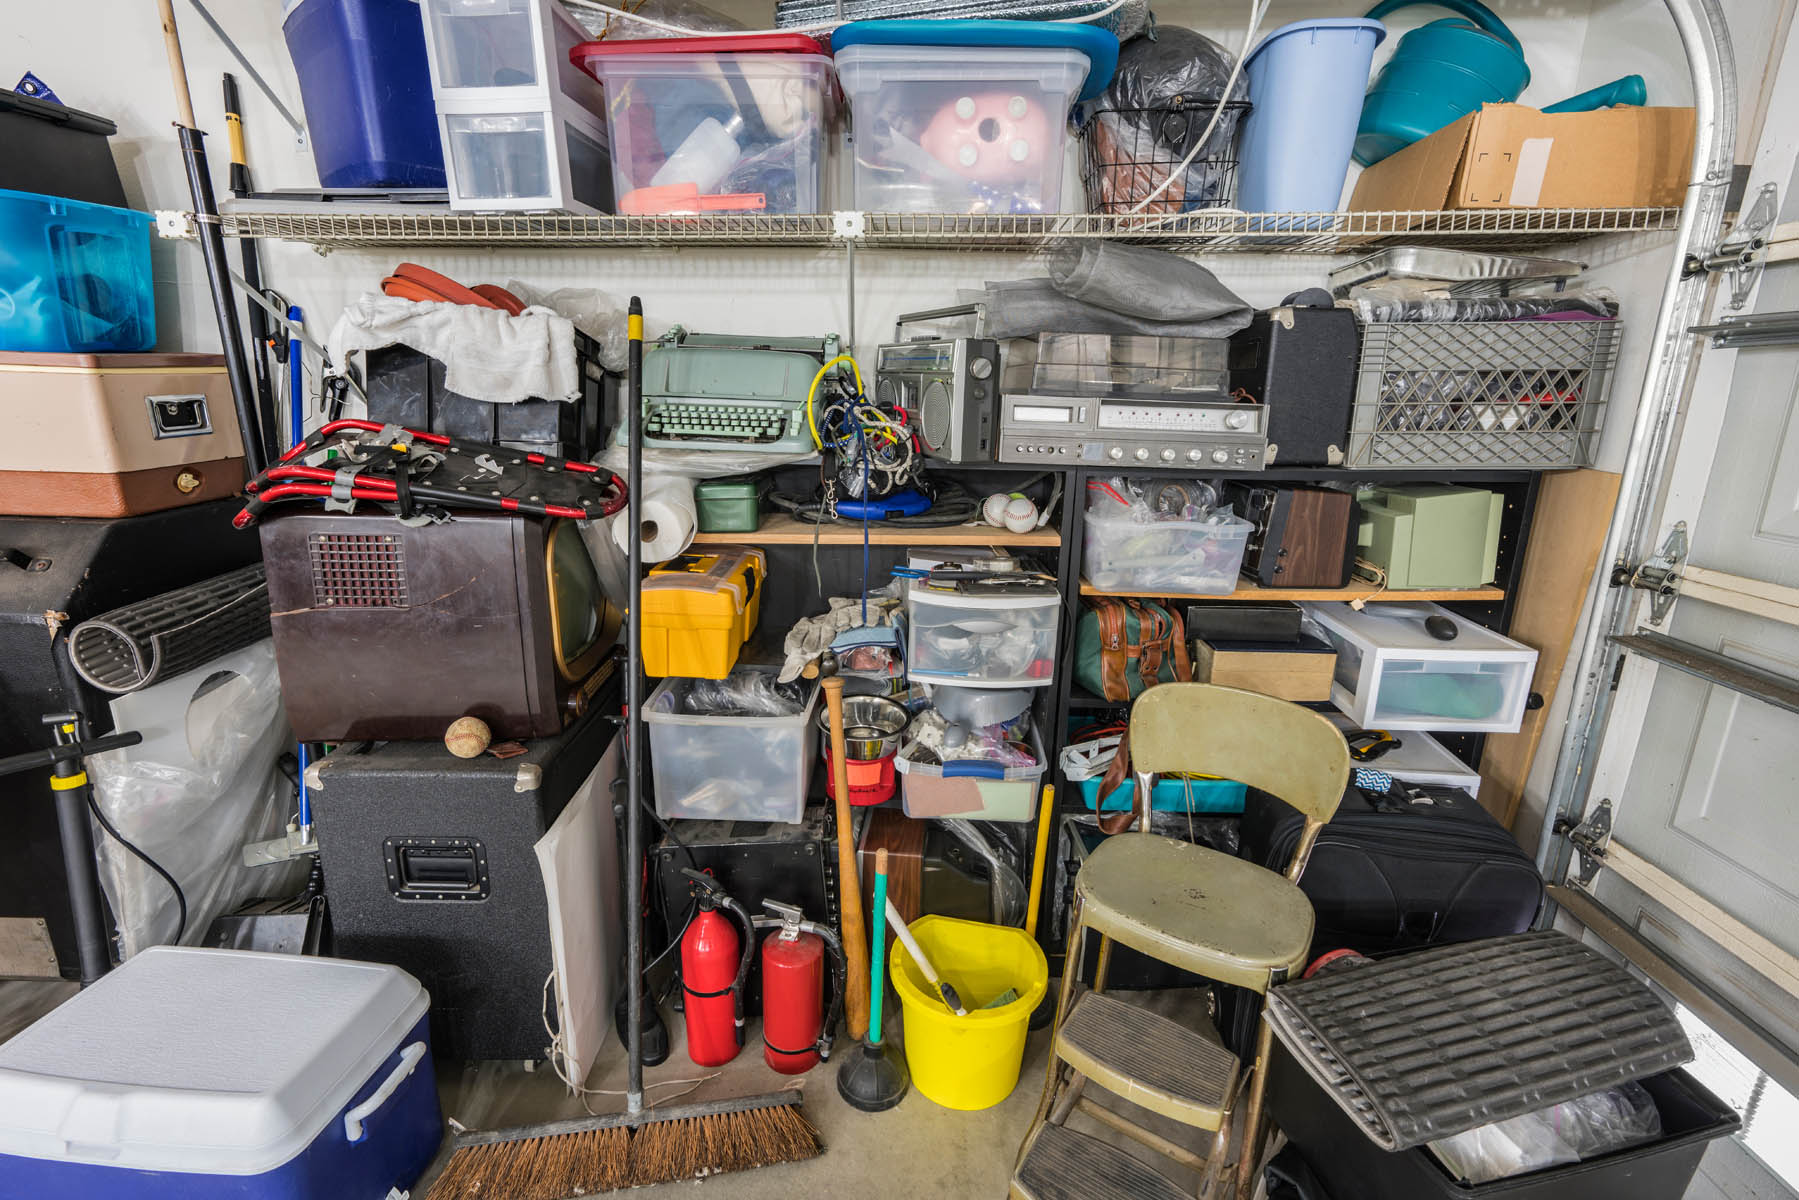 Messy cluttered junk filled suburban garage shelves with vintage electronics, houseware and sports equipment.